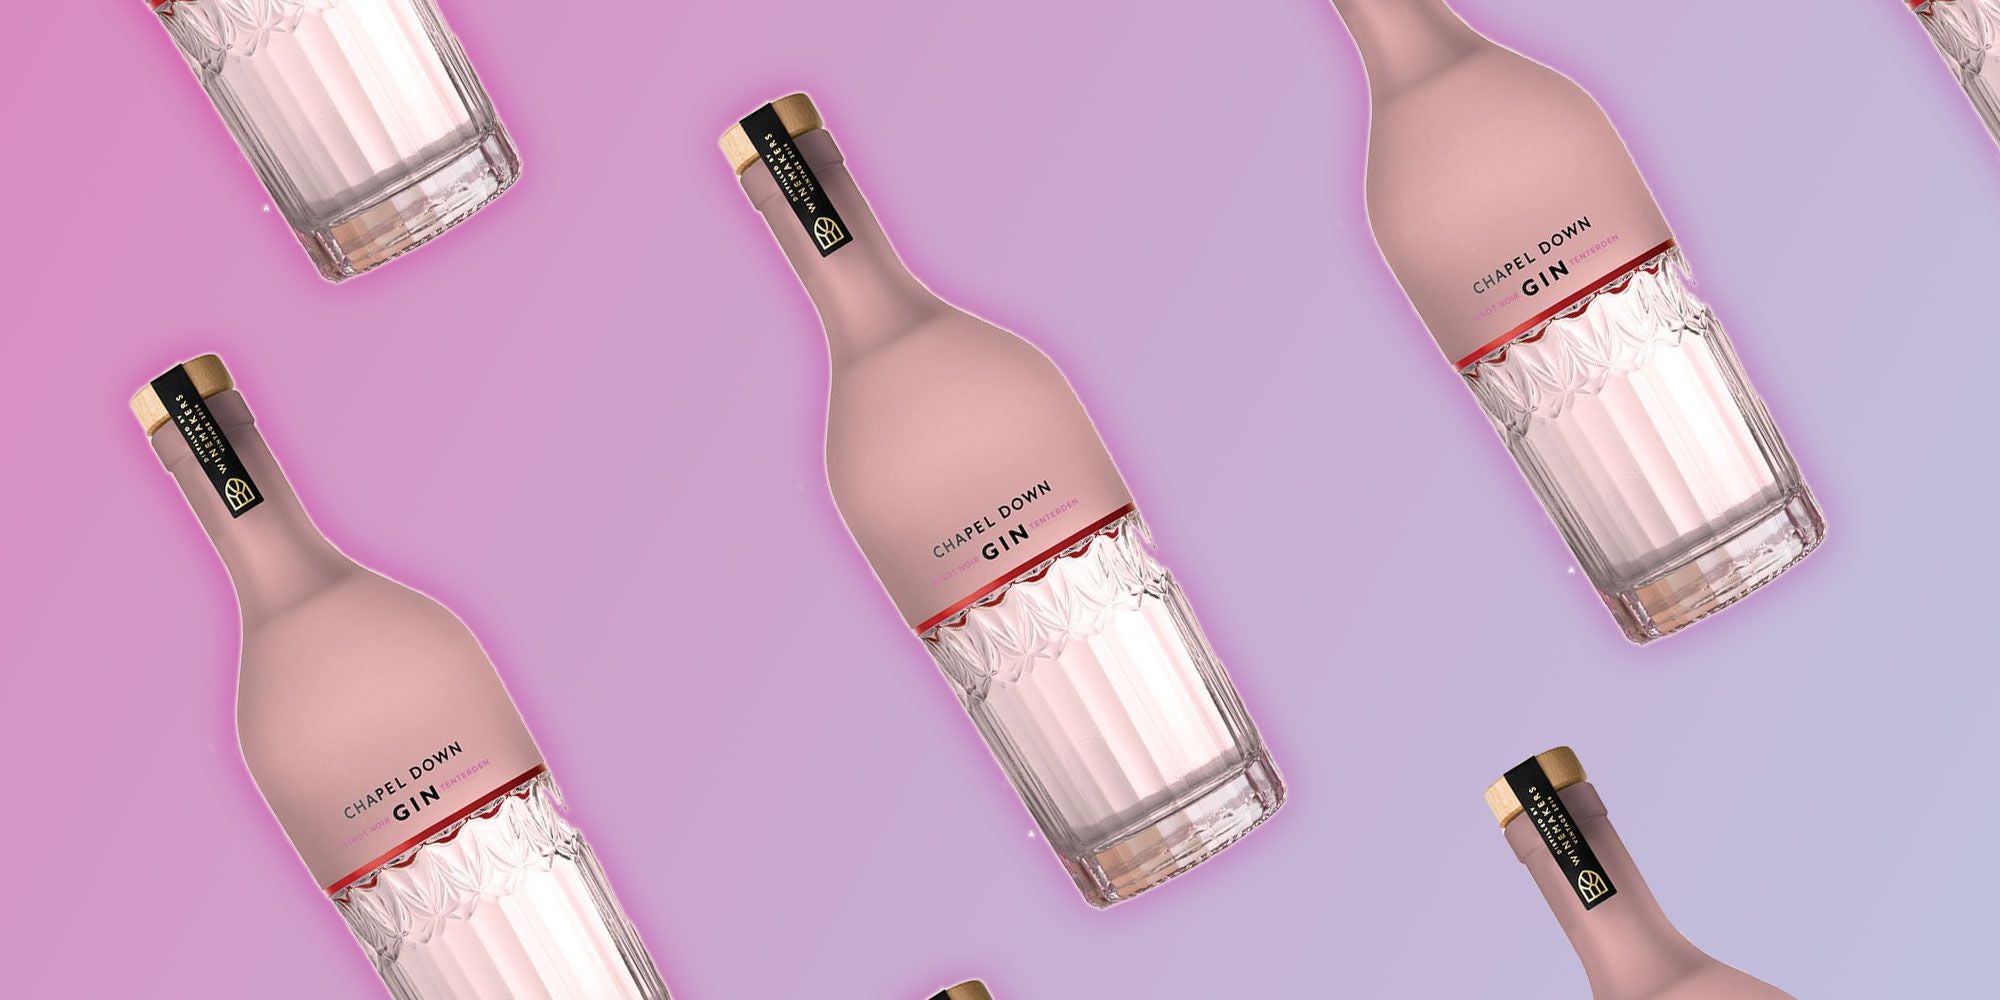 A-Rosé-wine-gin-hybrid-has-arrived The Bottle Club